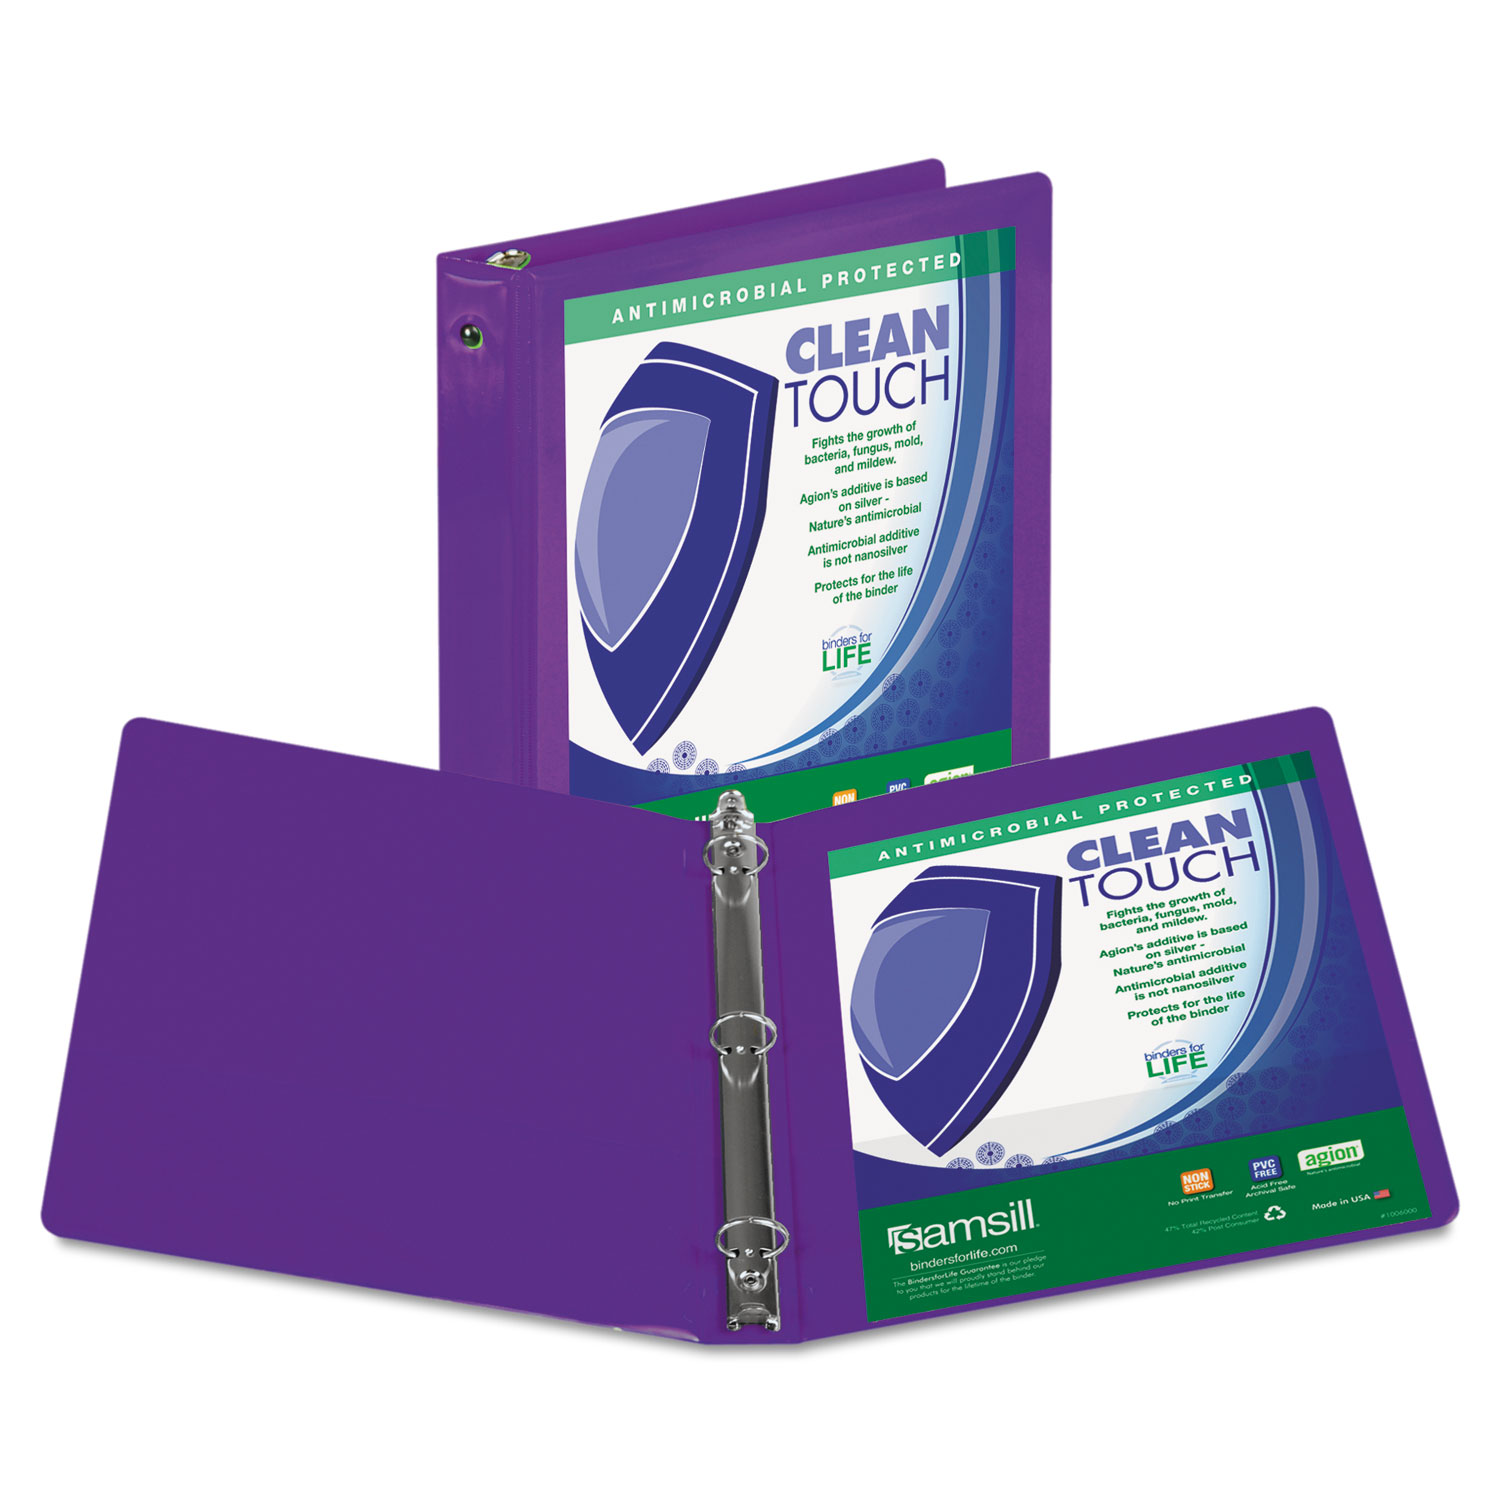 Clean Touch Round Ring View Binder, Antimicrobial, 2, Purple